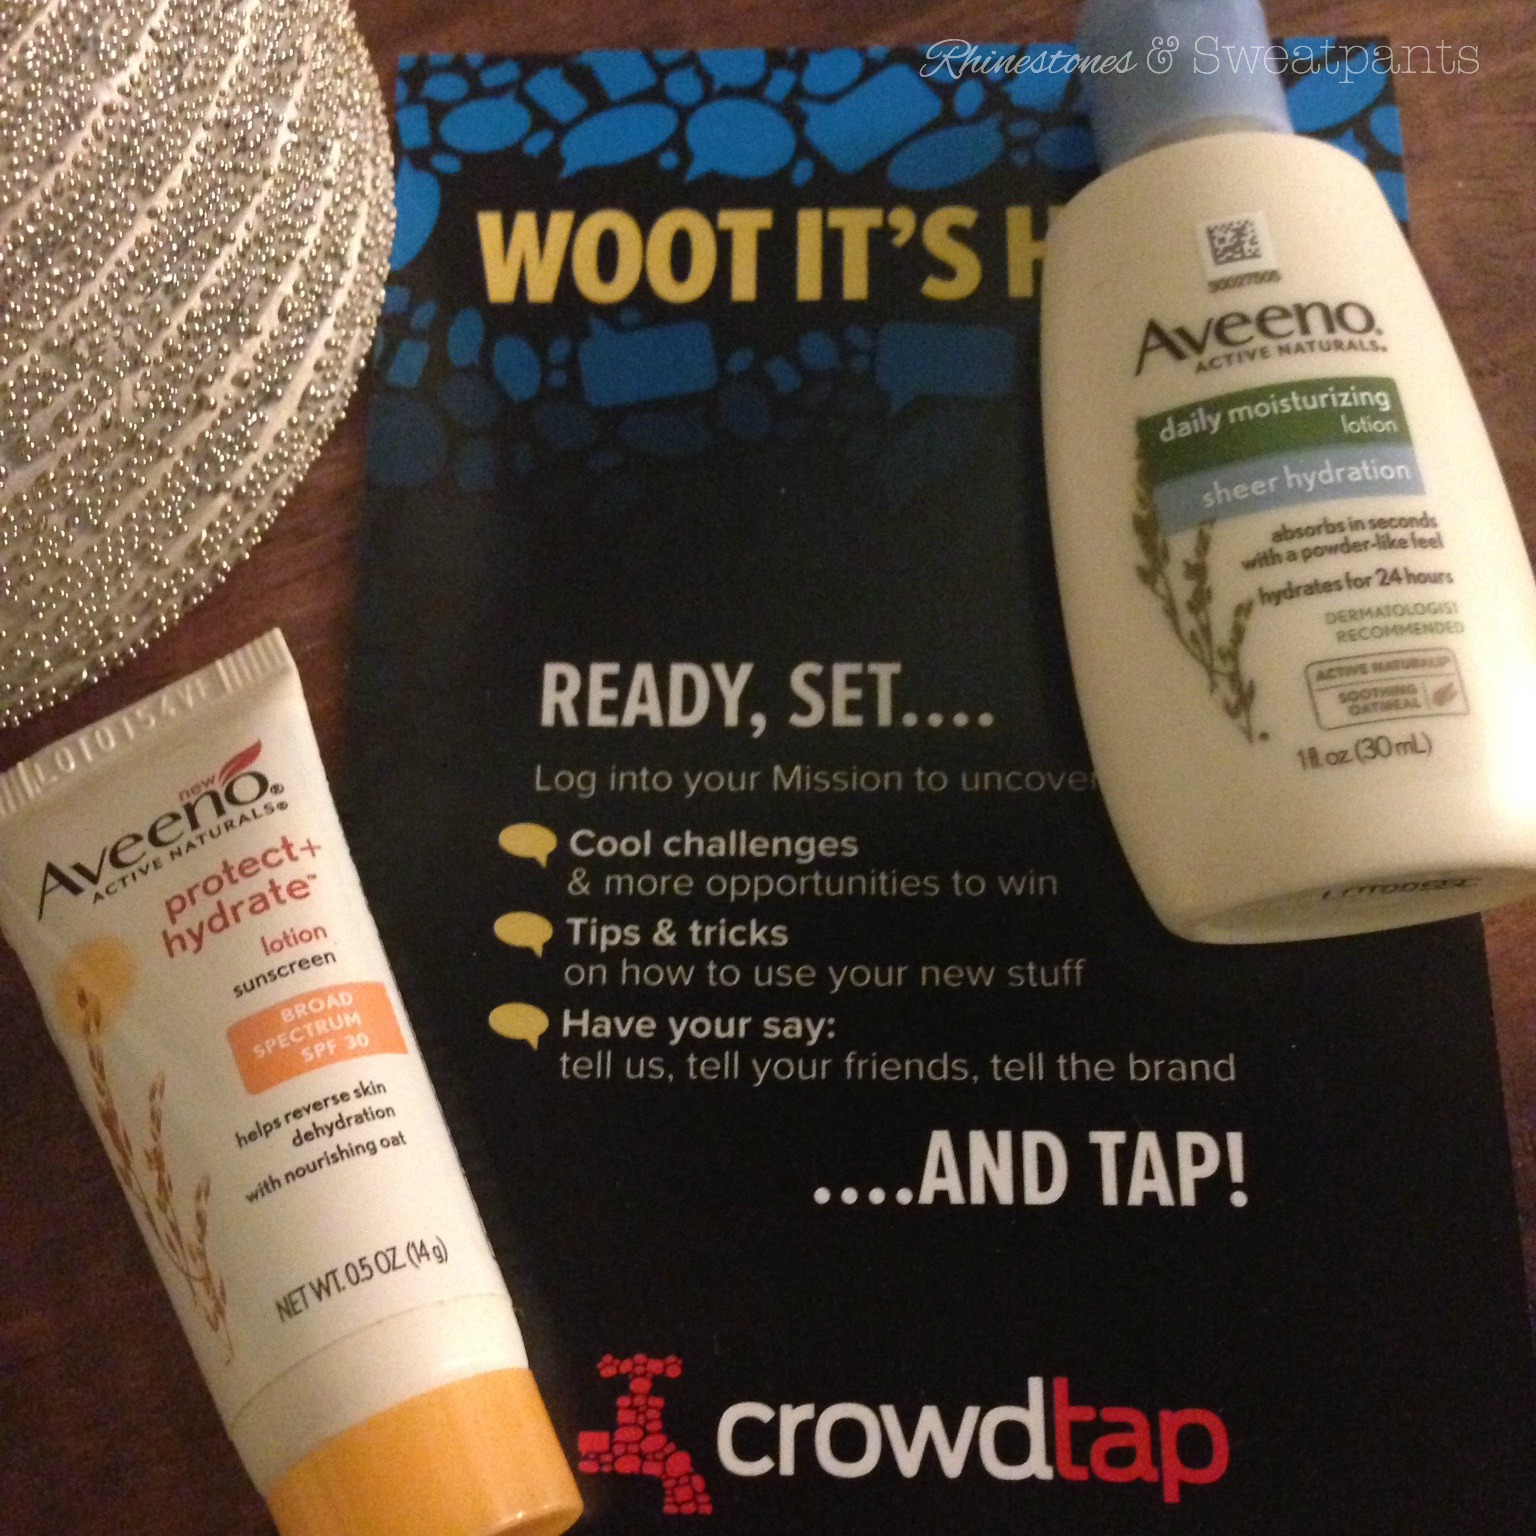 Aveeno Sample Share from Crowdtap